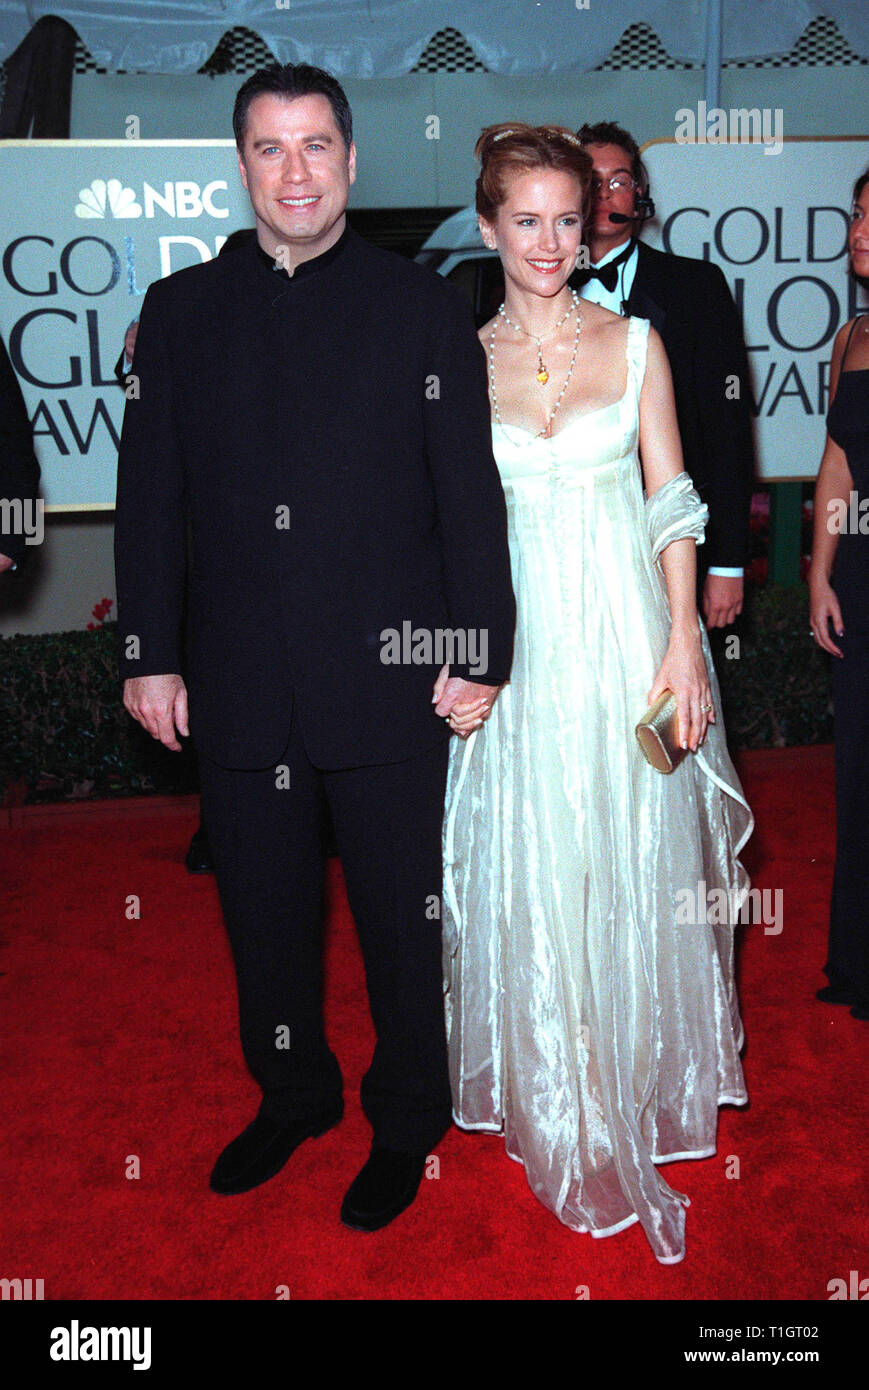 LOS ANGELES, CA - January 24, 1999: Actor JOHN TRAVOLTA & actress wife KELLY PRESTON at the Golden Globe Awards in Beverly Hills. He was nominated for Best Actor in a Movie (Comedy/Musical) for 'Primary Colors'.               © Paul Smith/Featureflash Stock Photo